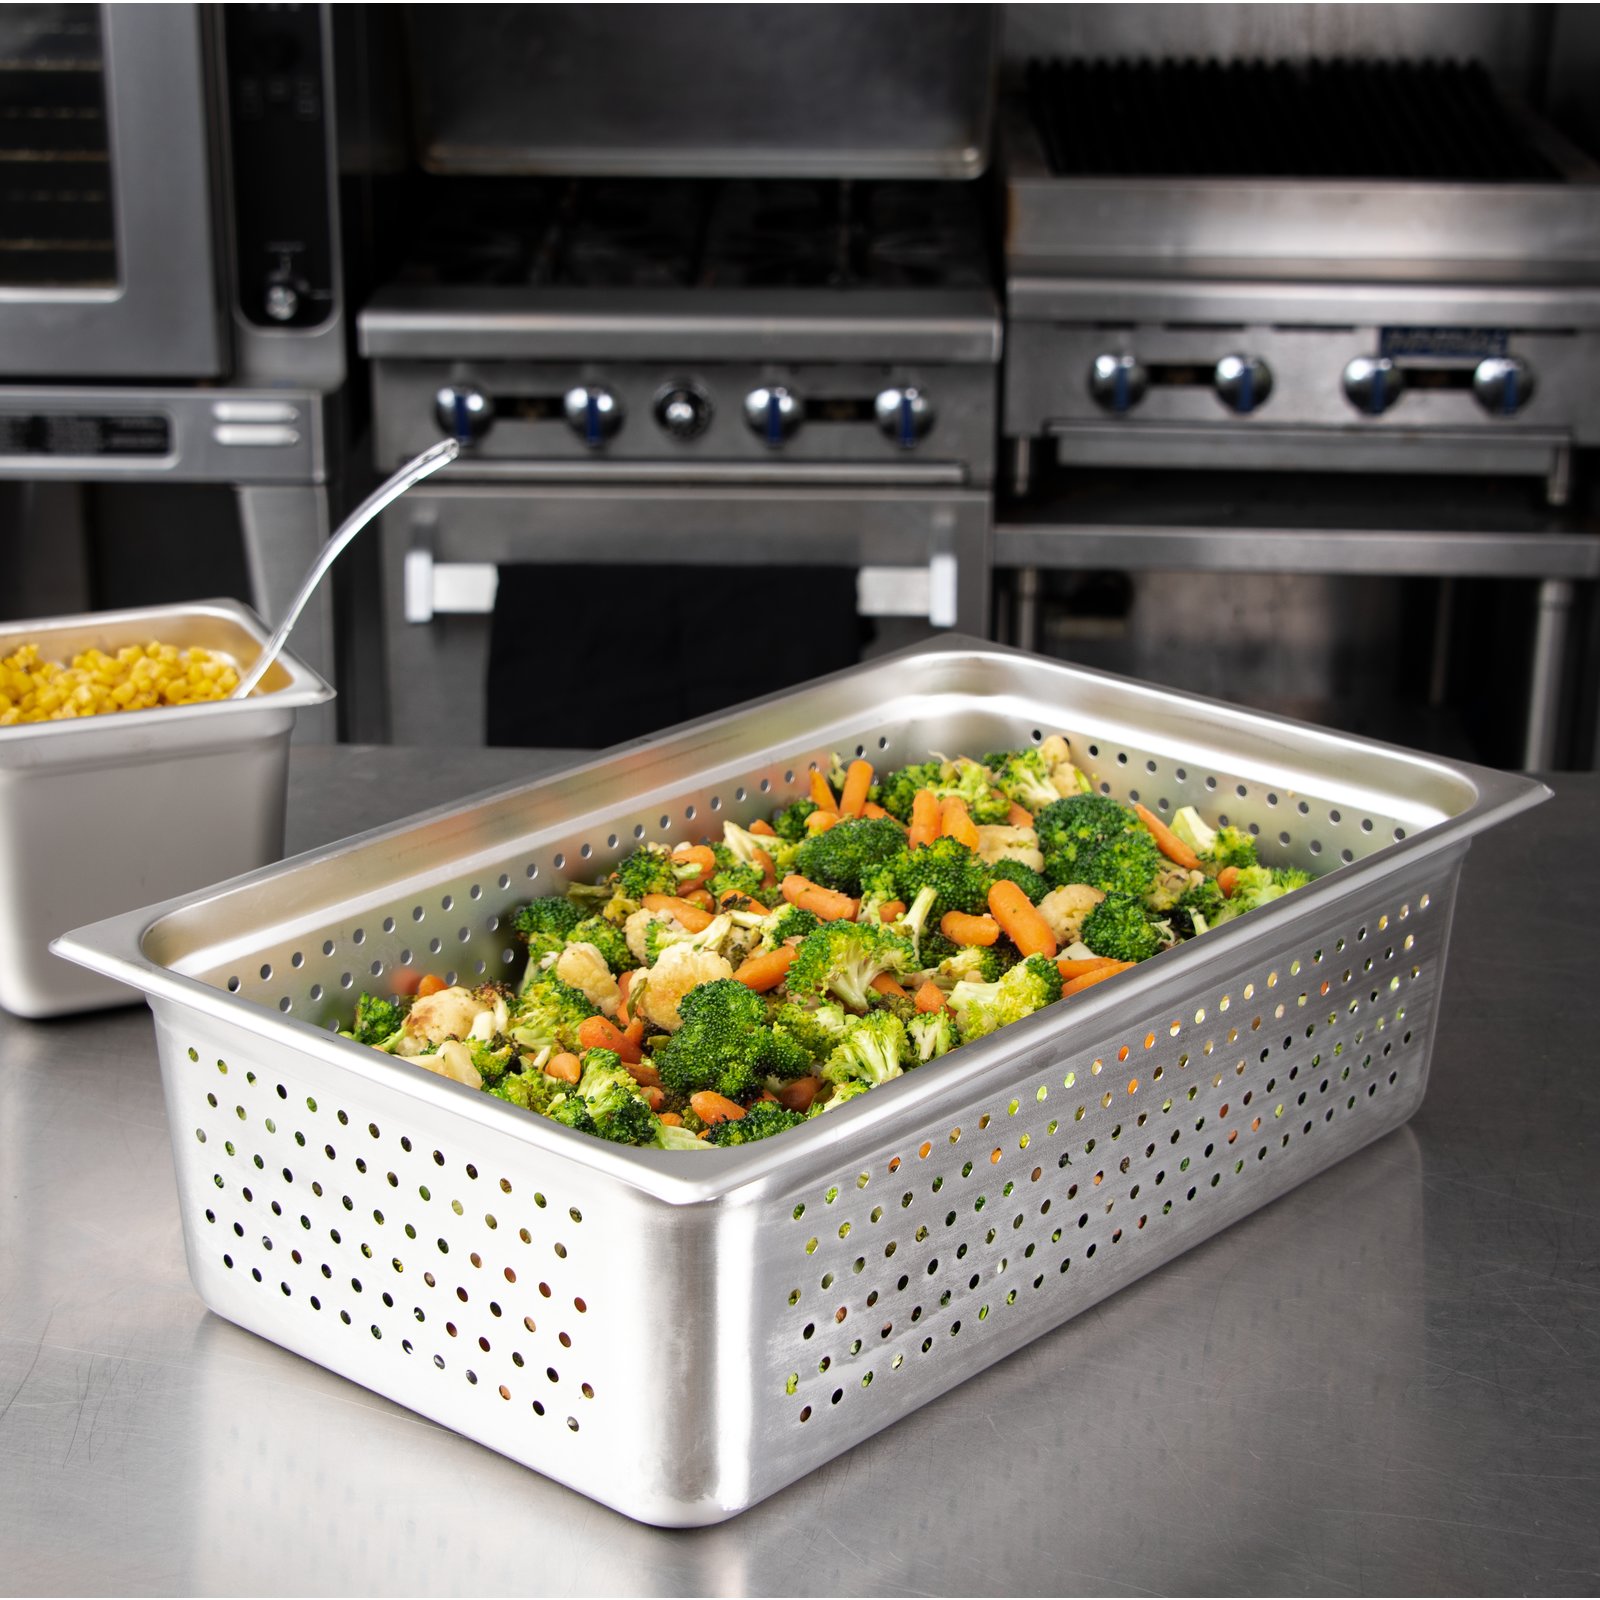 Details about   Full Size 4" Deep Solid Stainless Steel Hotel Steam Table Food Pan 